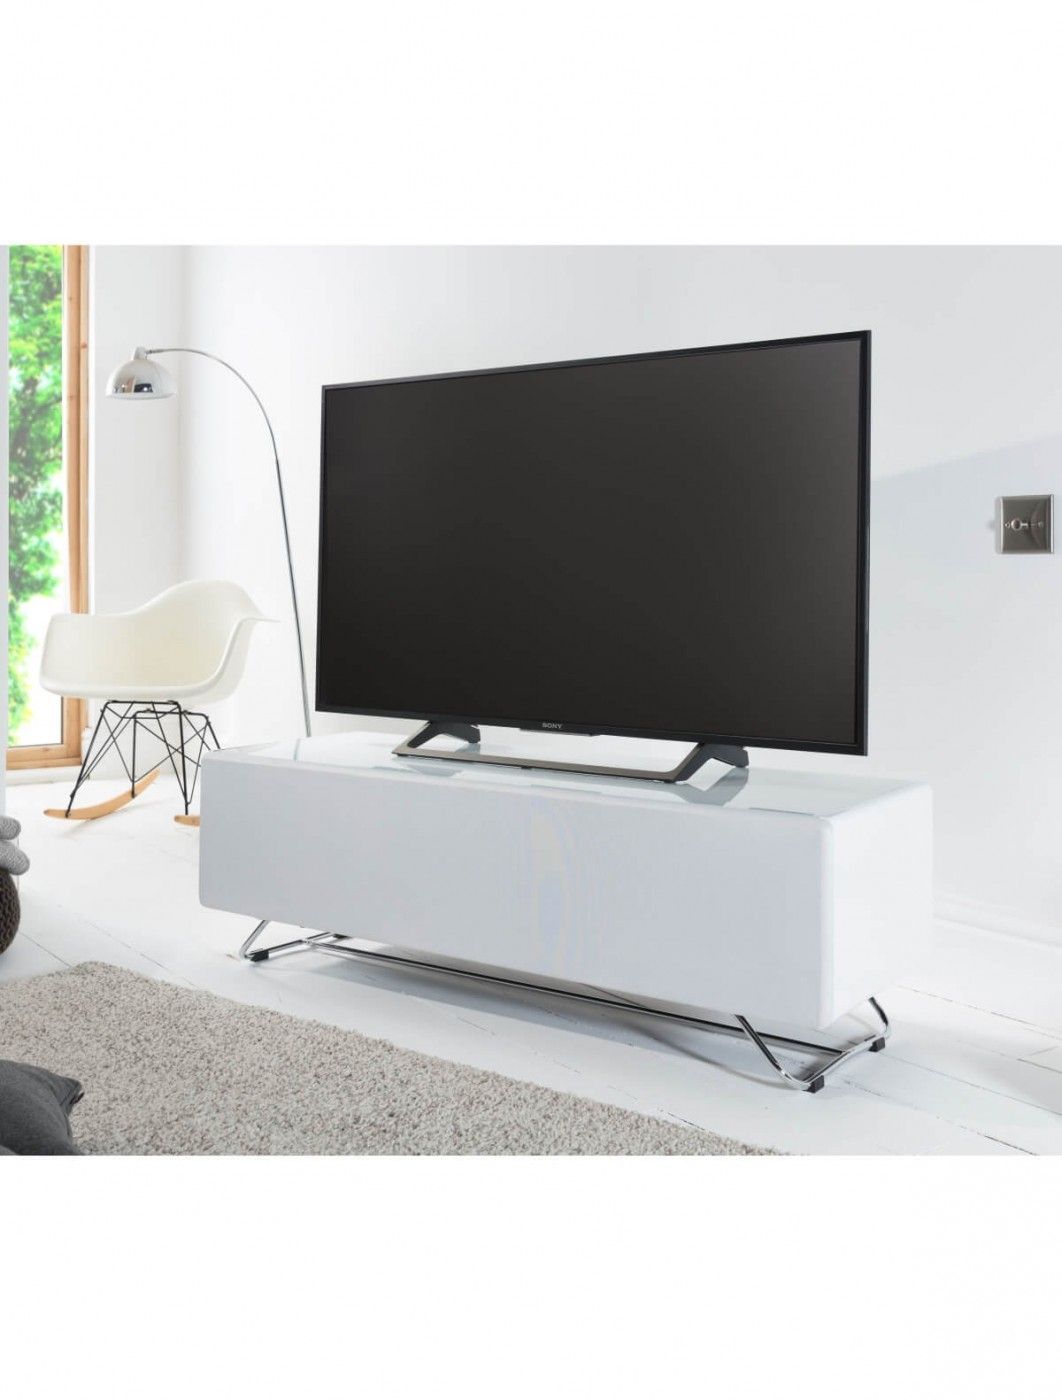 Tv Stand White Chromium Concept 1200mm Cro2 1200cpt Wh Within Chromium Tv Stands (Photo 12 of 15)